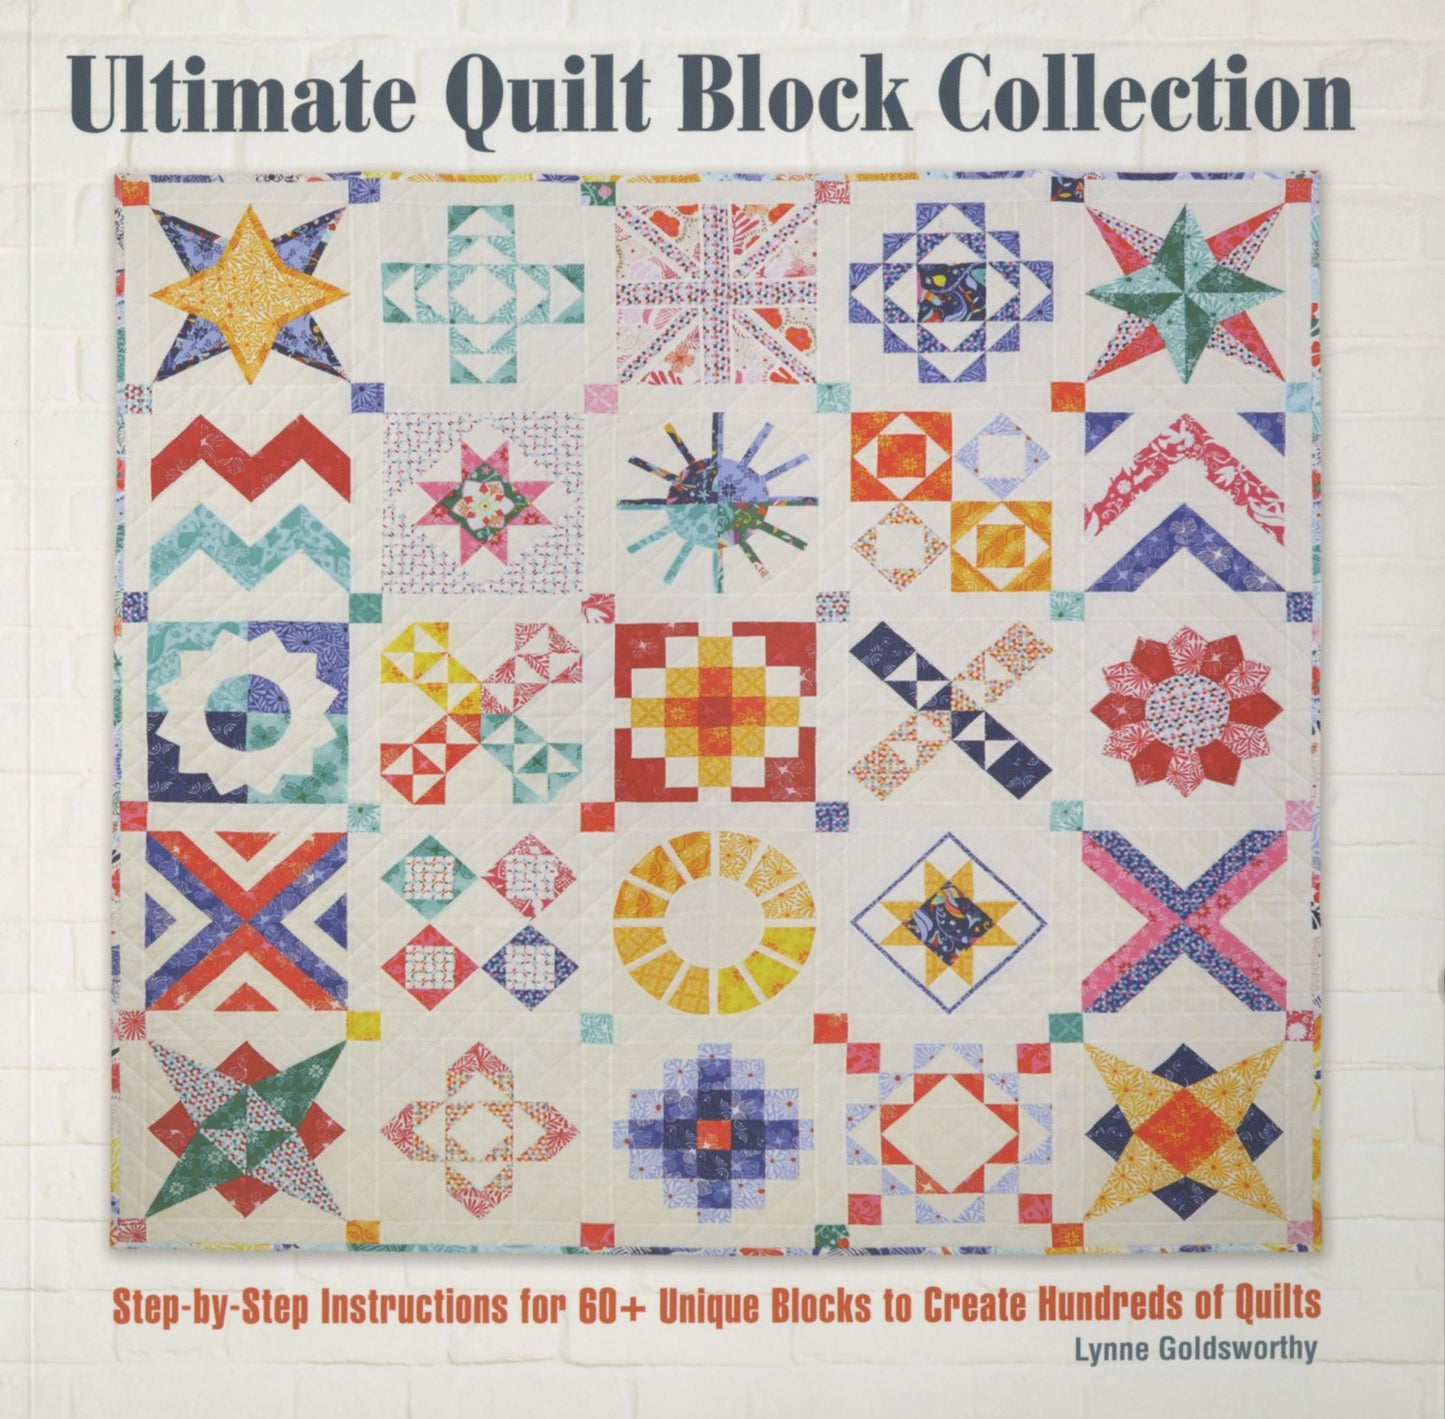 Ultimate Quilt Block Collection is a must have resource for quilters, featuring more than 70 original blocks from world renowned designers. From basic units like Flying Geese to more intricate motifs using foundation paper piecing, there's something here for every level of quilter. Mix and match classic and modern designs to make thunders of combinations. Lynn offers clear step by step instructions for every block with beautiful photos of every project. 